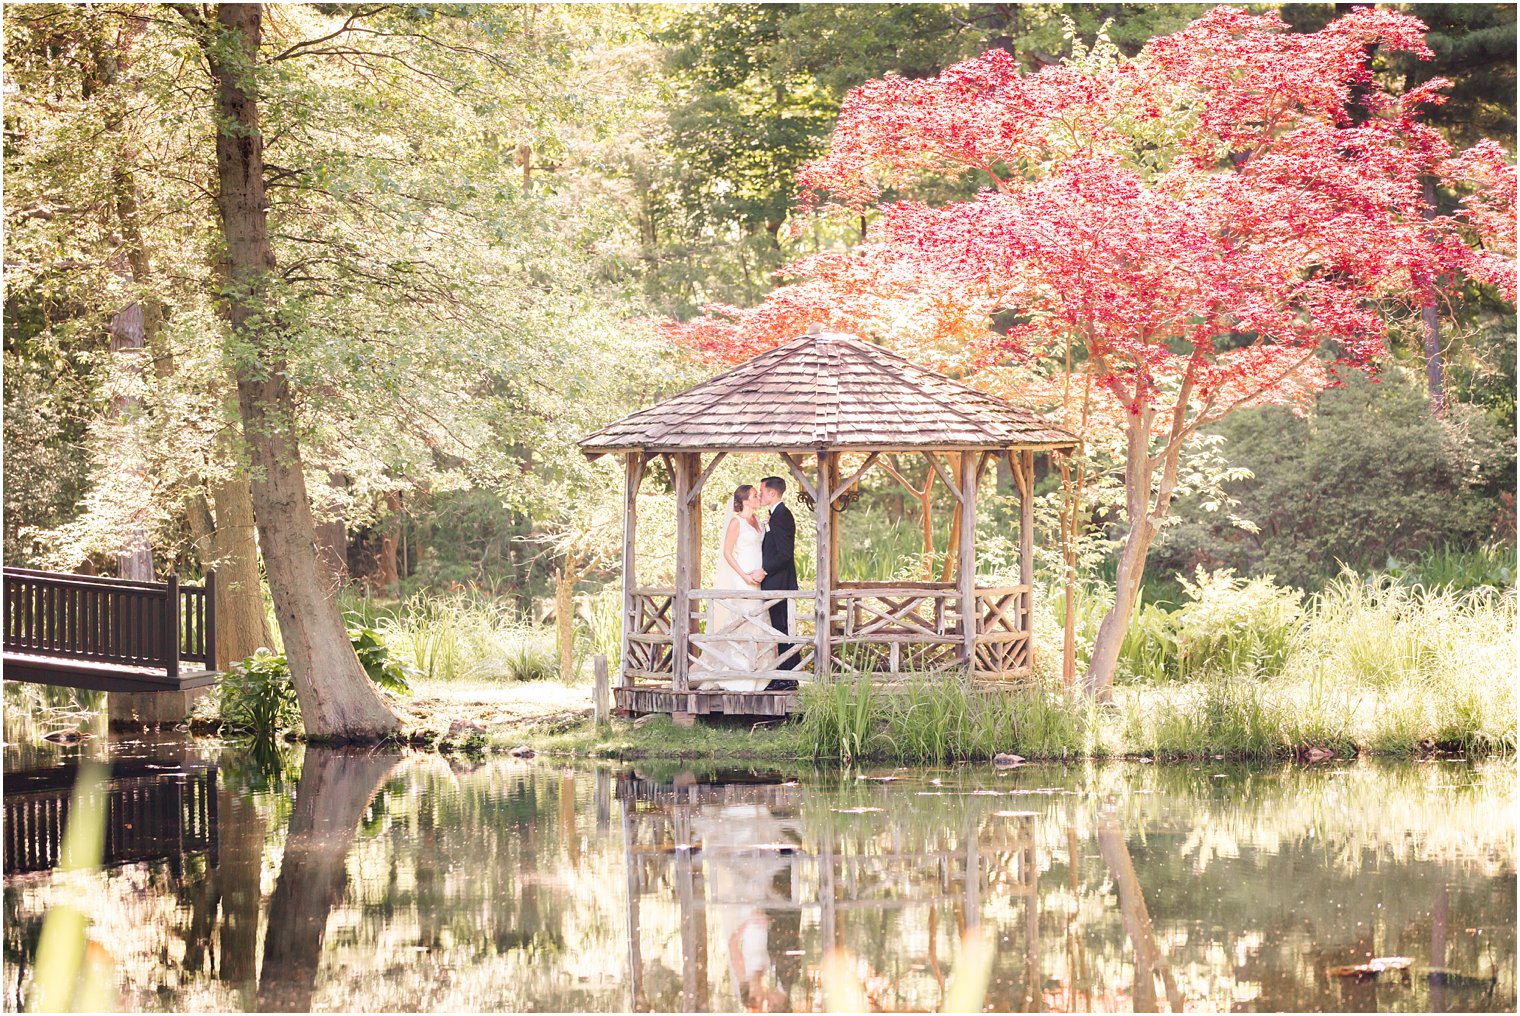 romantic portrait of bride and groom in a gazebo in front of a reflective pond